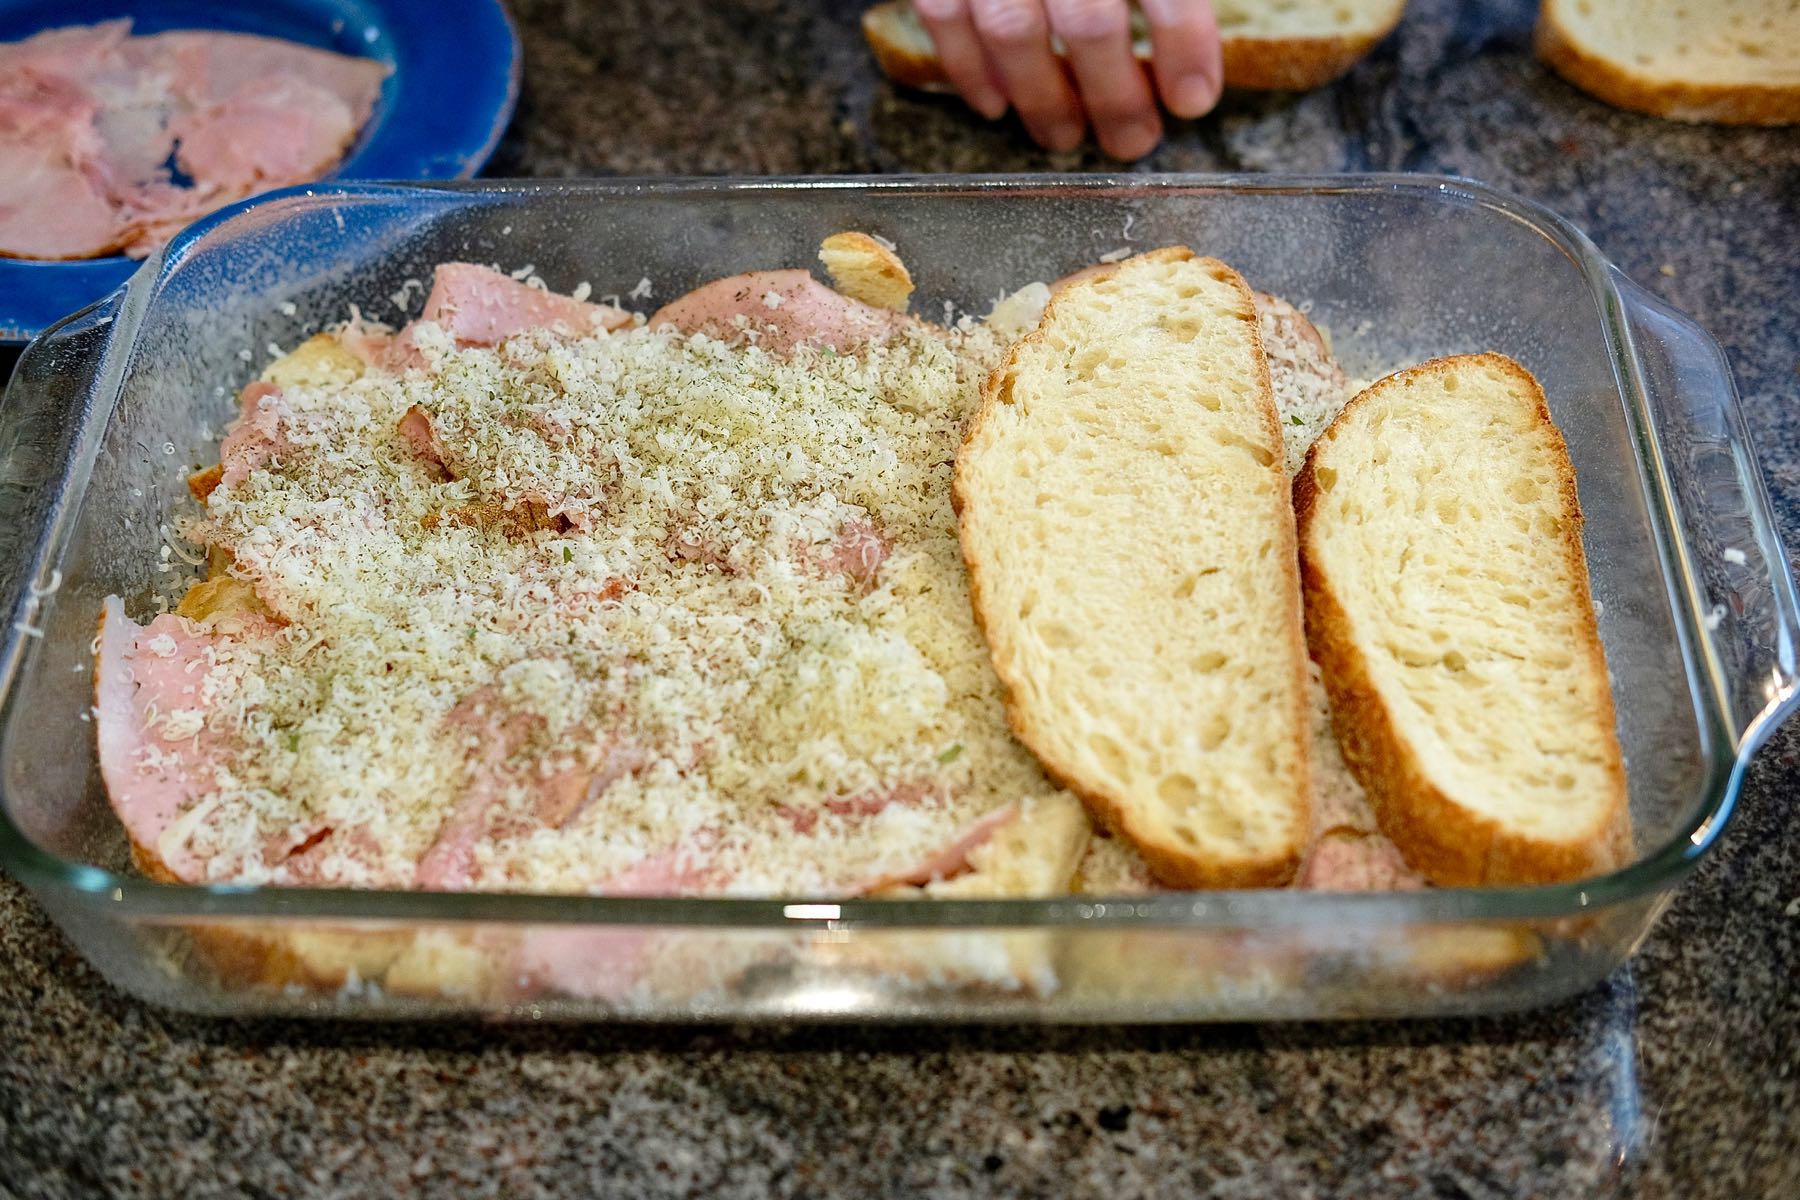 Assembly of the second layer of bread in glass baking dish.